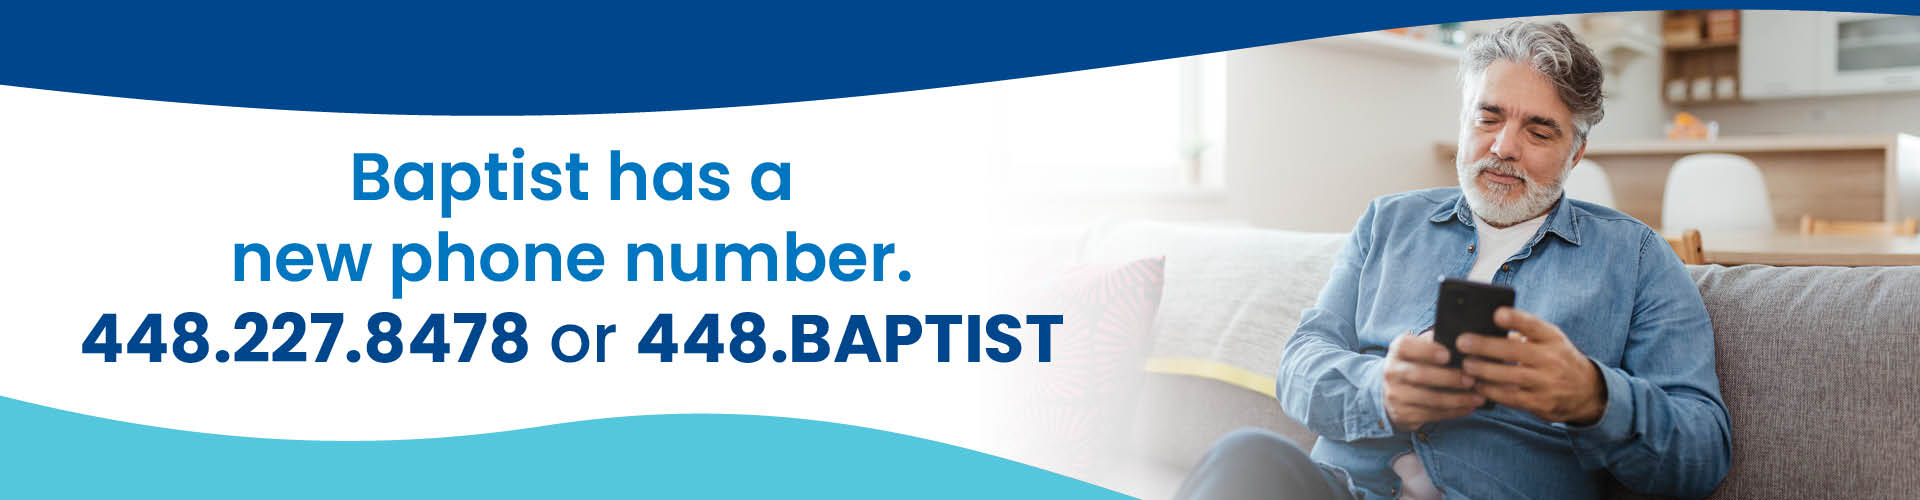 Older man with grey beard holding and looking at his cell phone with text next to him saying Baptist has a new phone number 448.227.8478 or 448.baptist